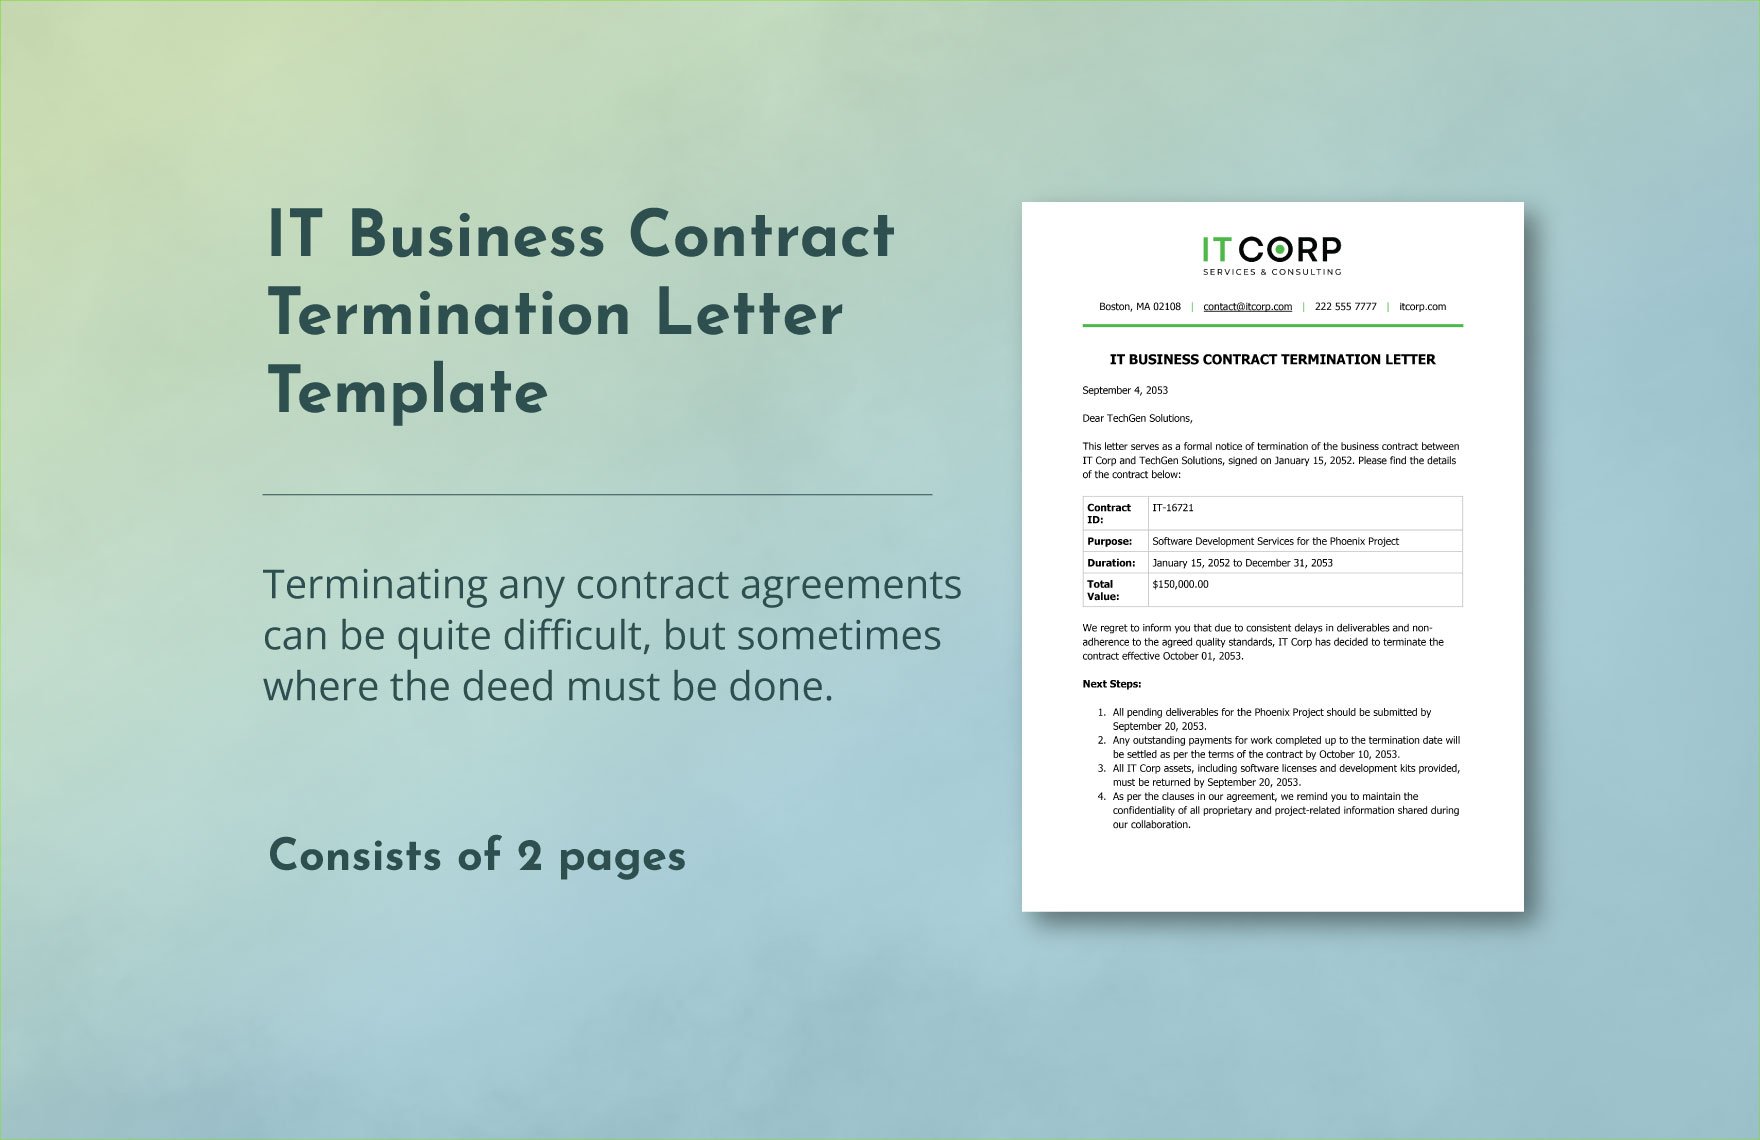 IT Business Contract Termination Letter Template in Word, Google Docs, PDF